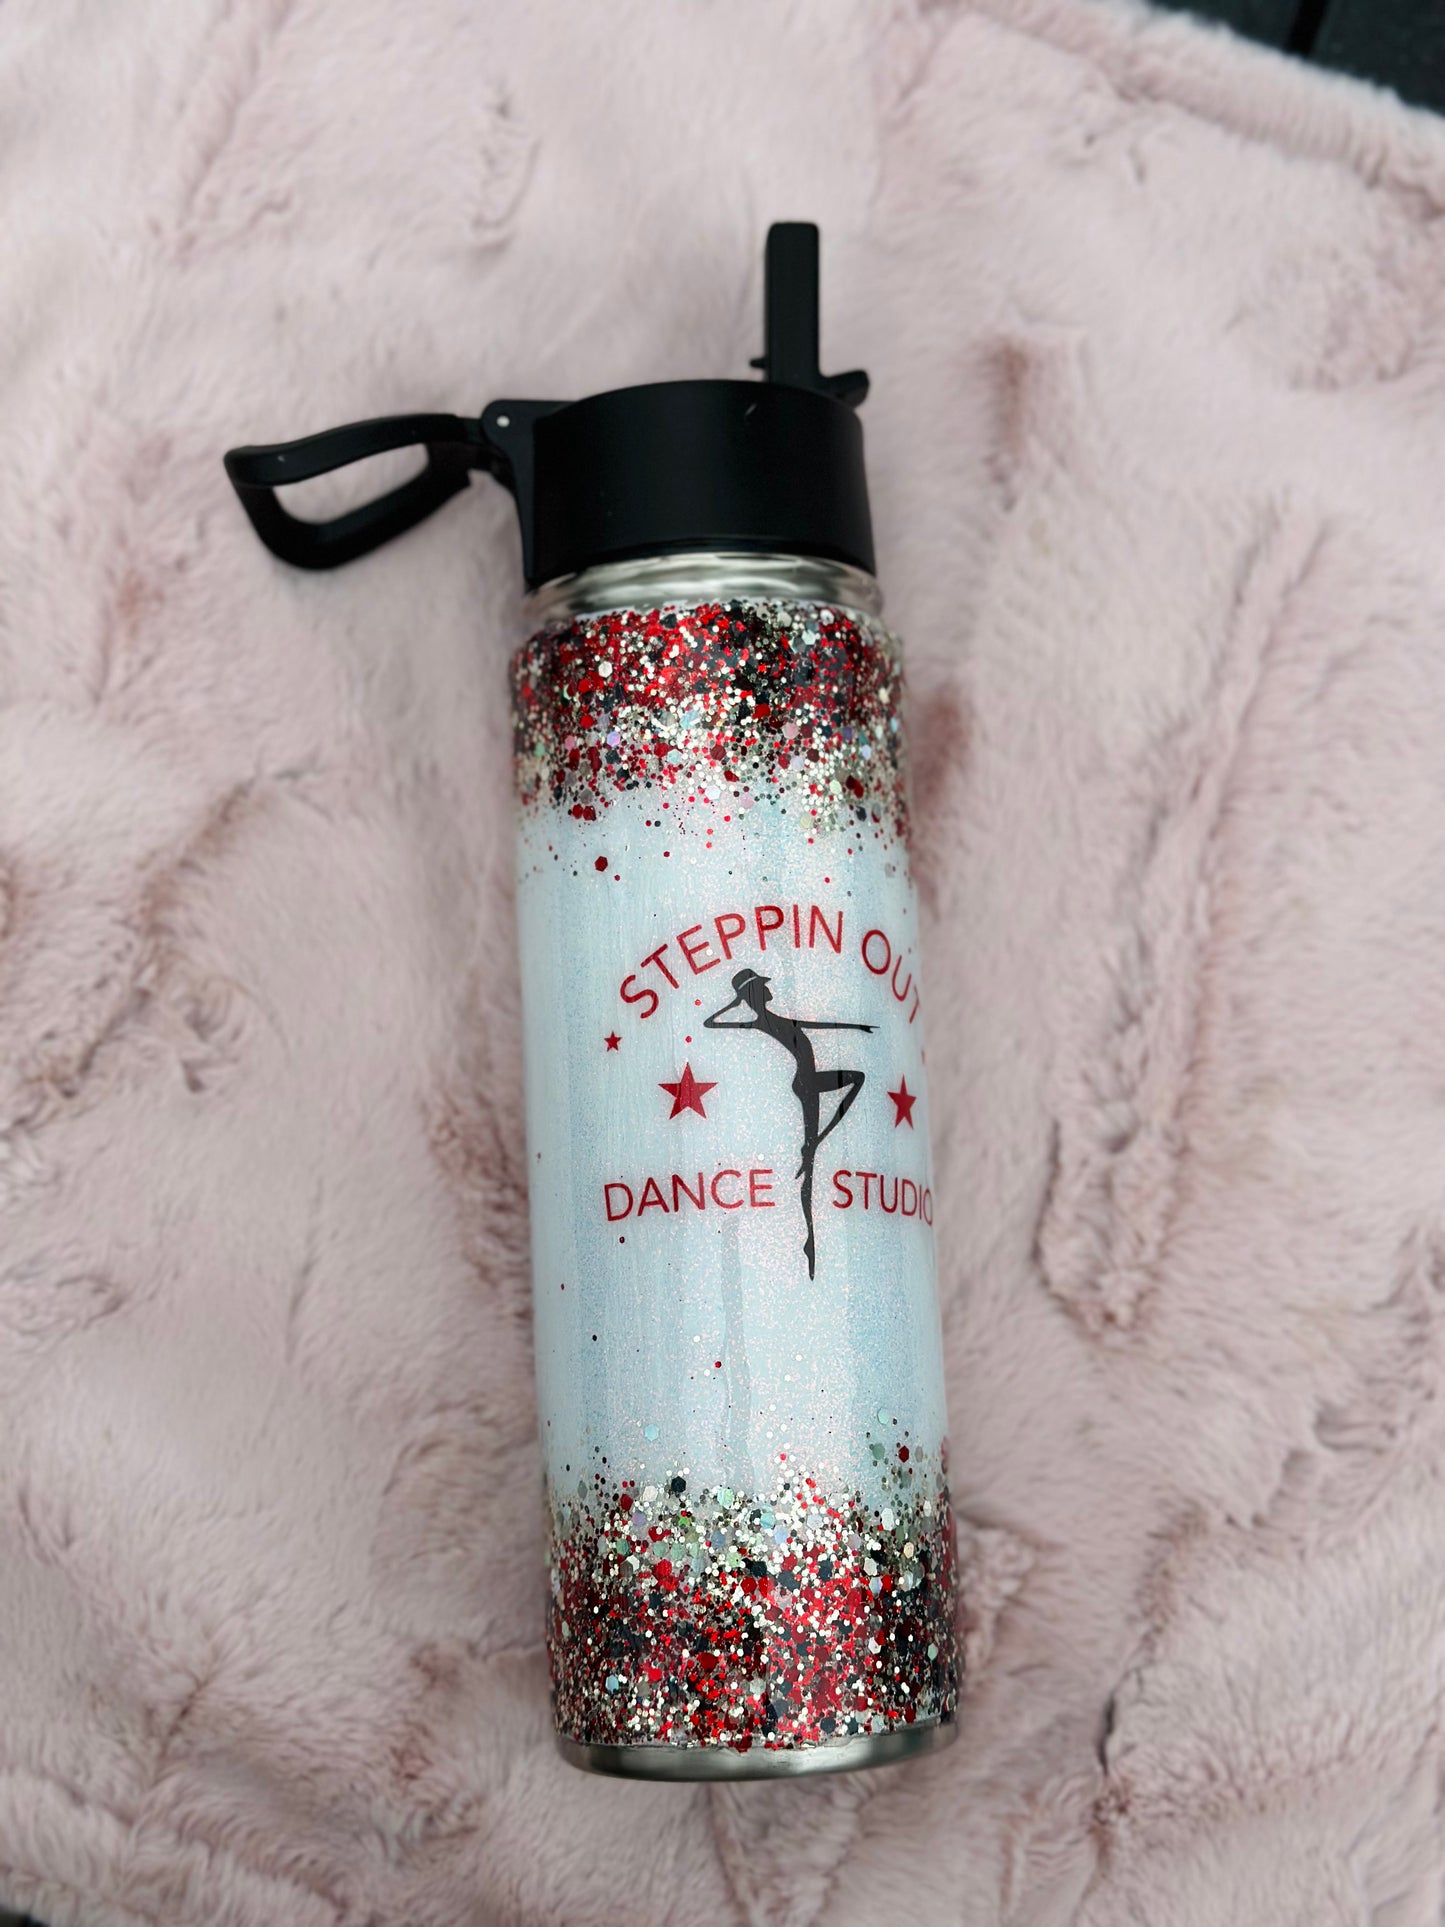 Steppin Out Dance Studio 20 oz Water Bottle PRE-ORDER closes 11/1